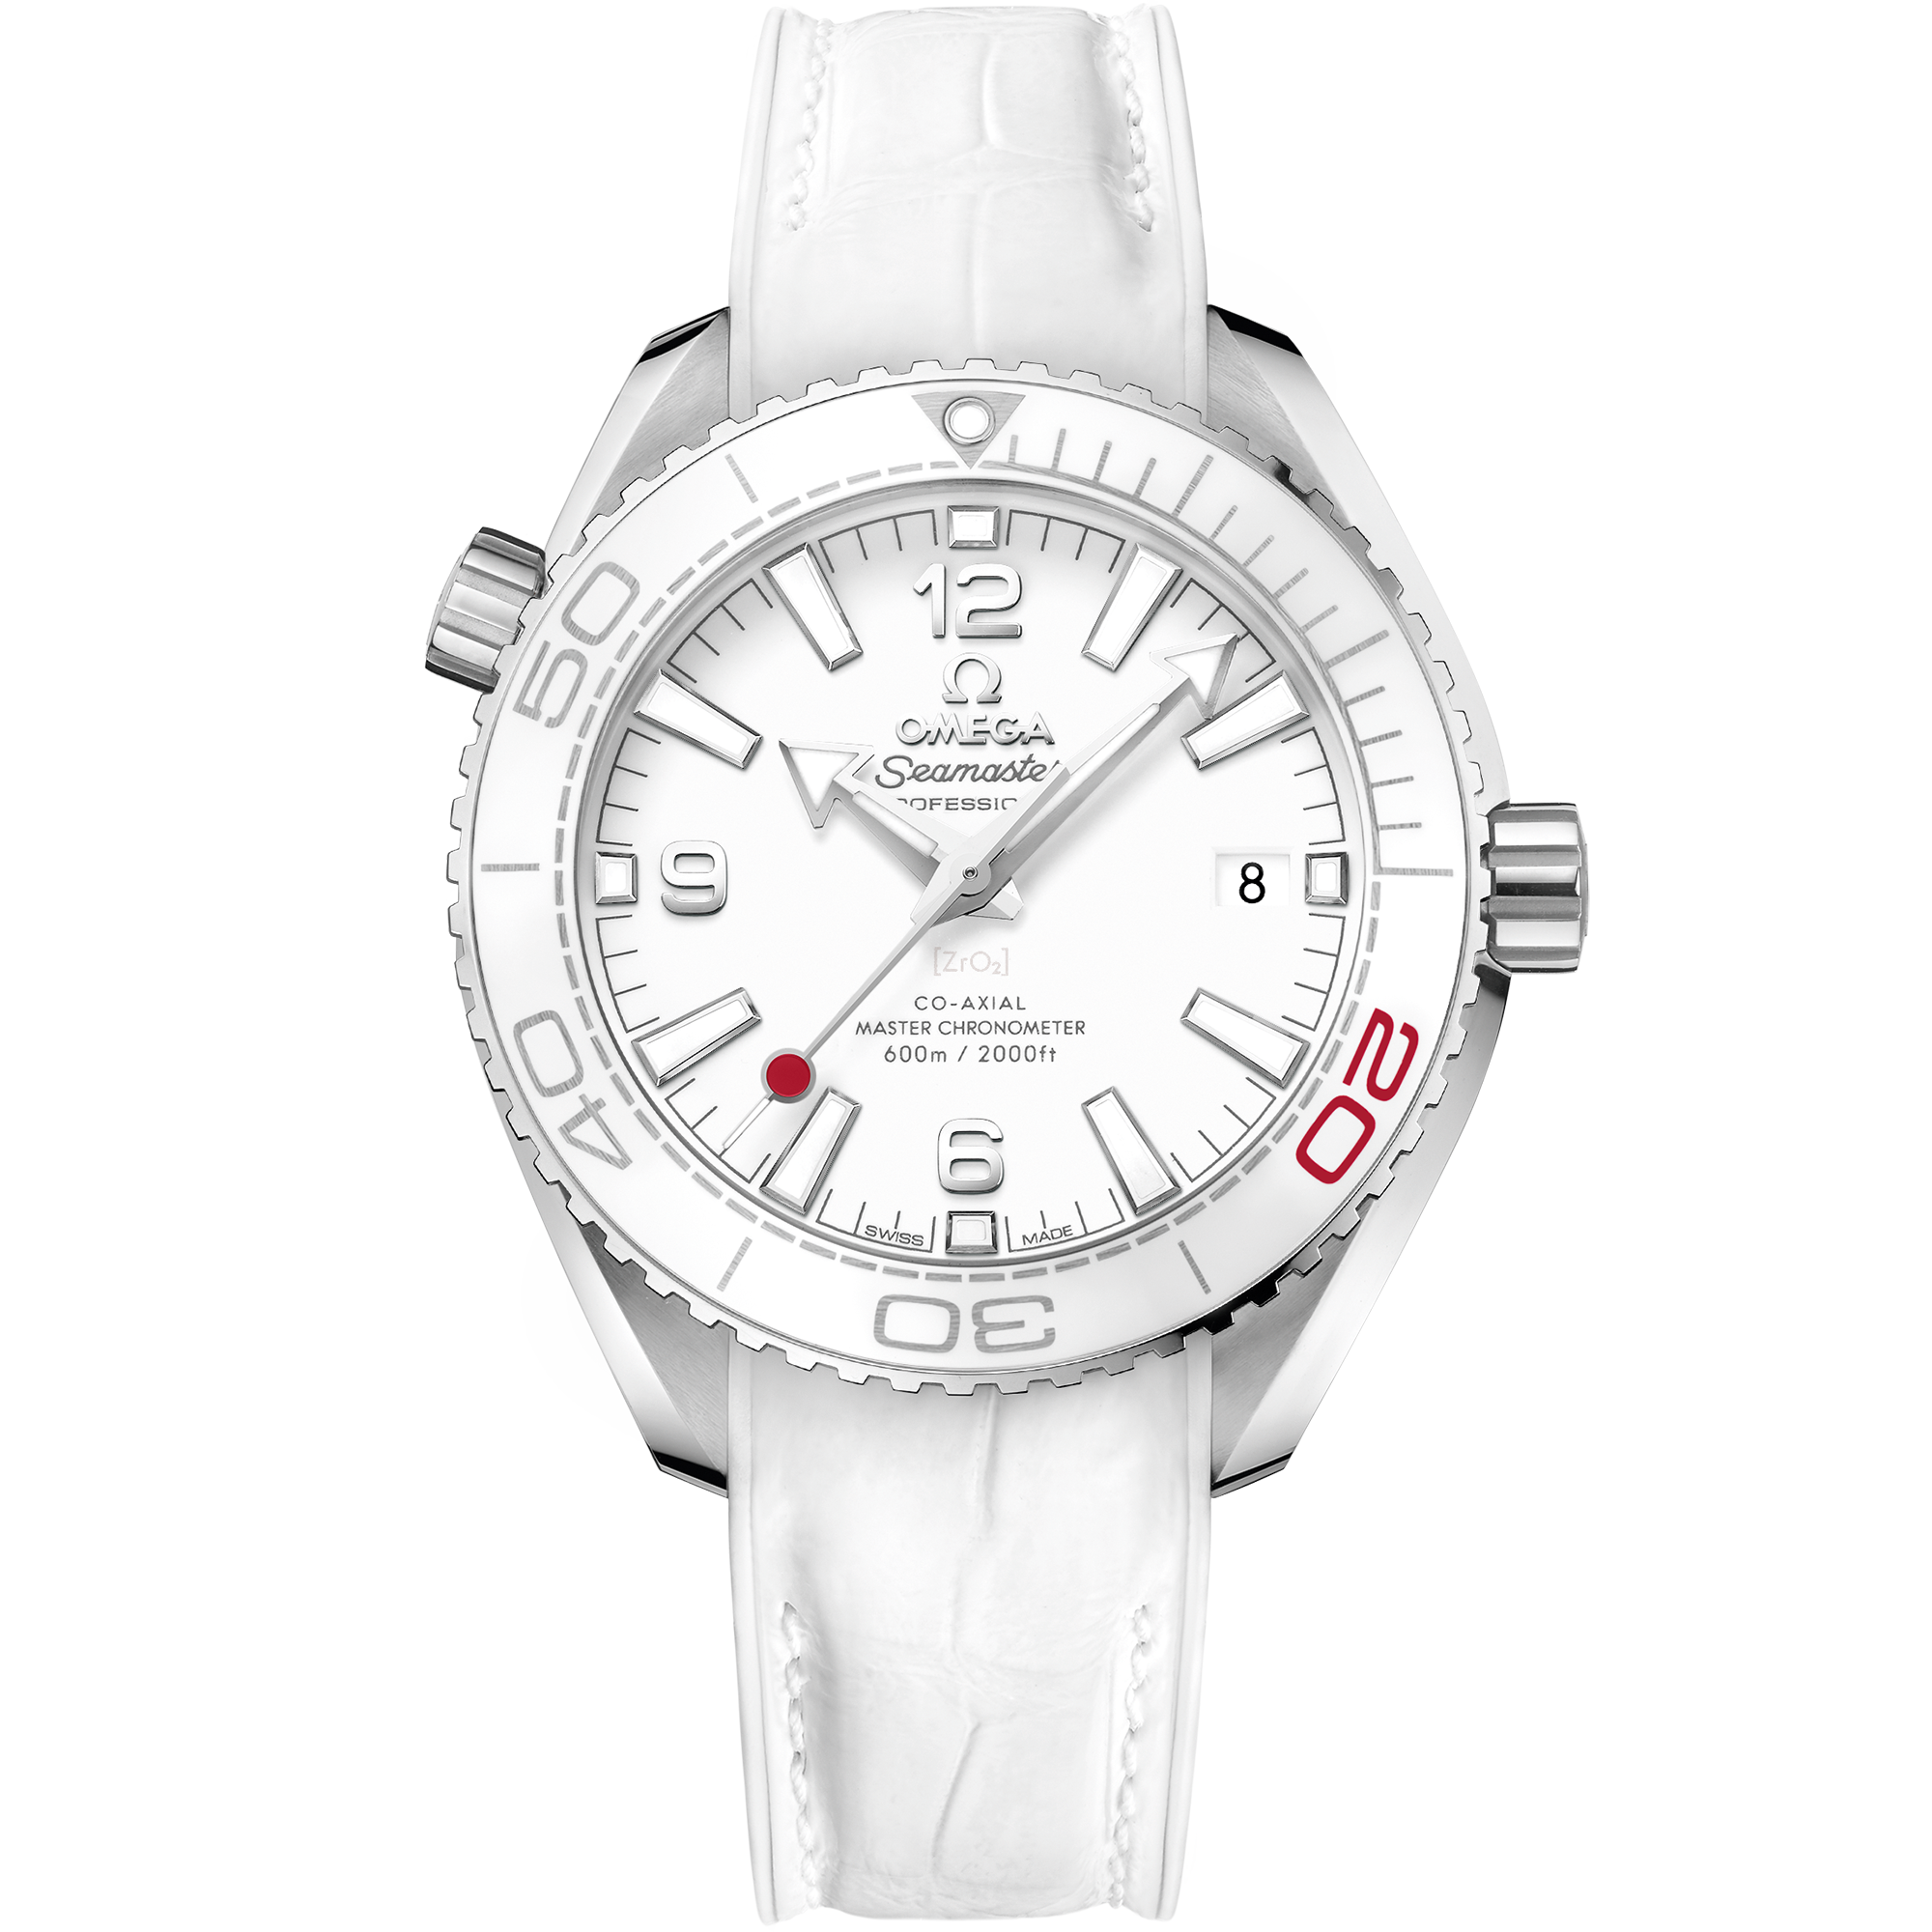 Seamaster 39.5 mm, steel on leather strap - 522.33.40.20.04.001